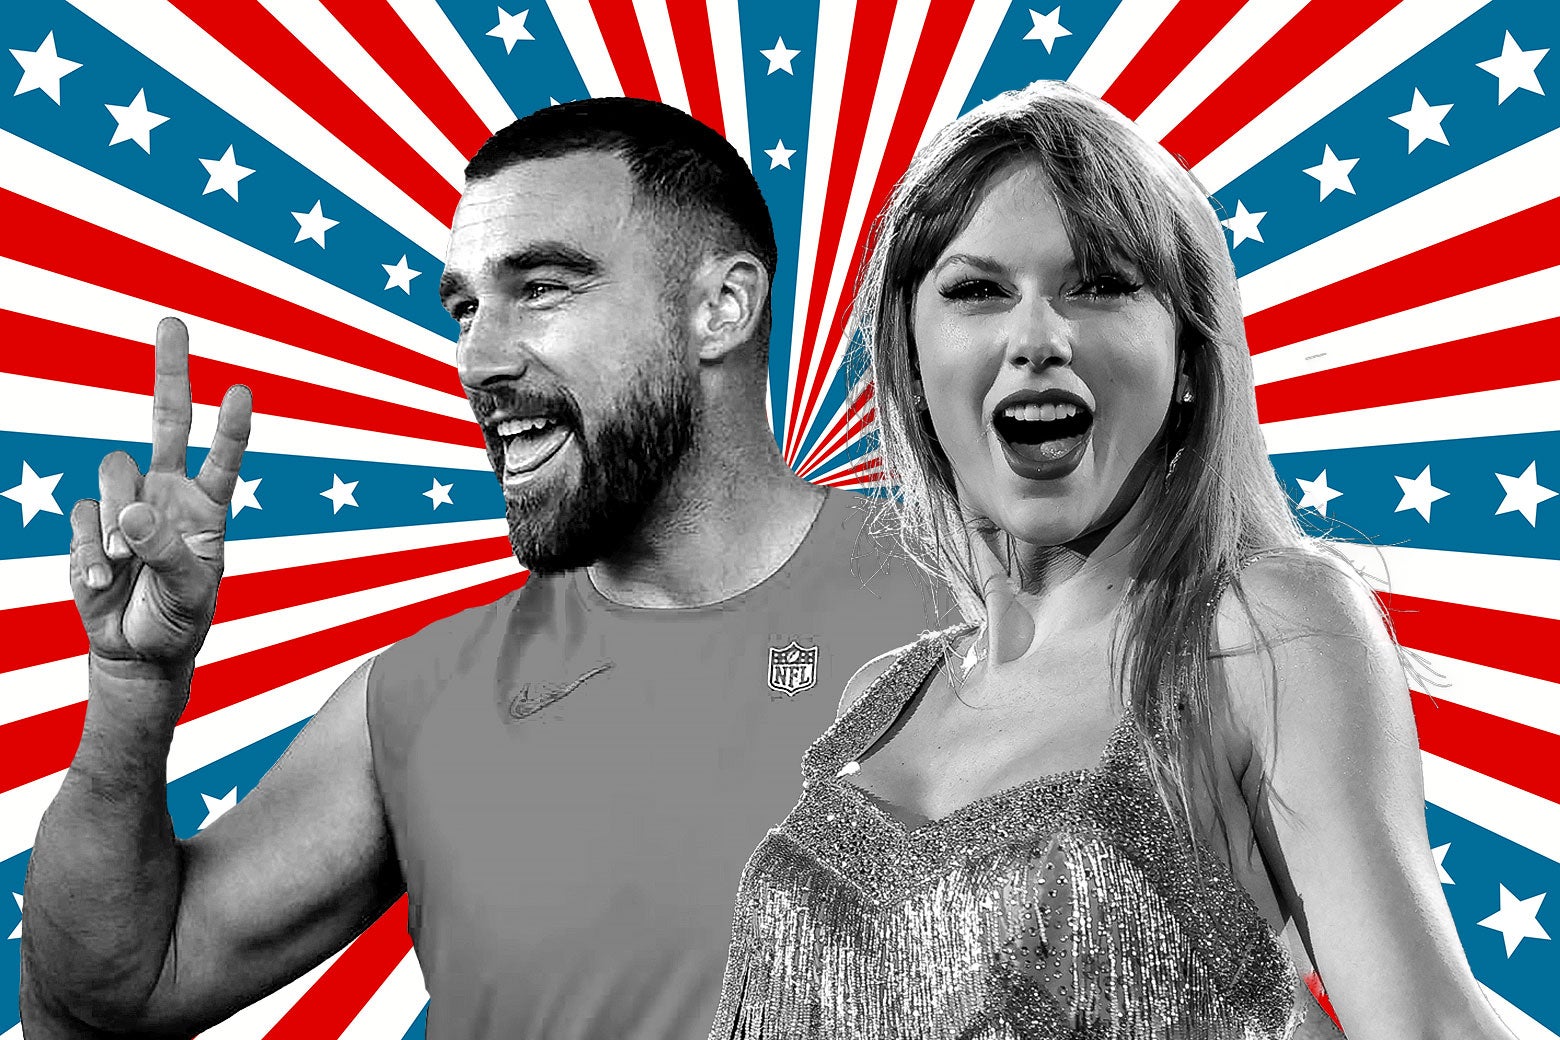 Travis Kelce and Taylor Swift May Soon Take Their Romance